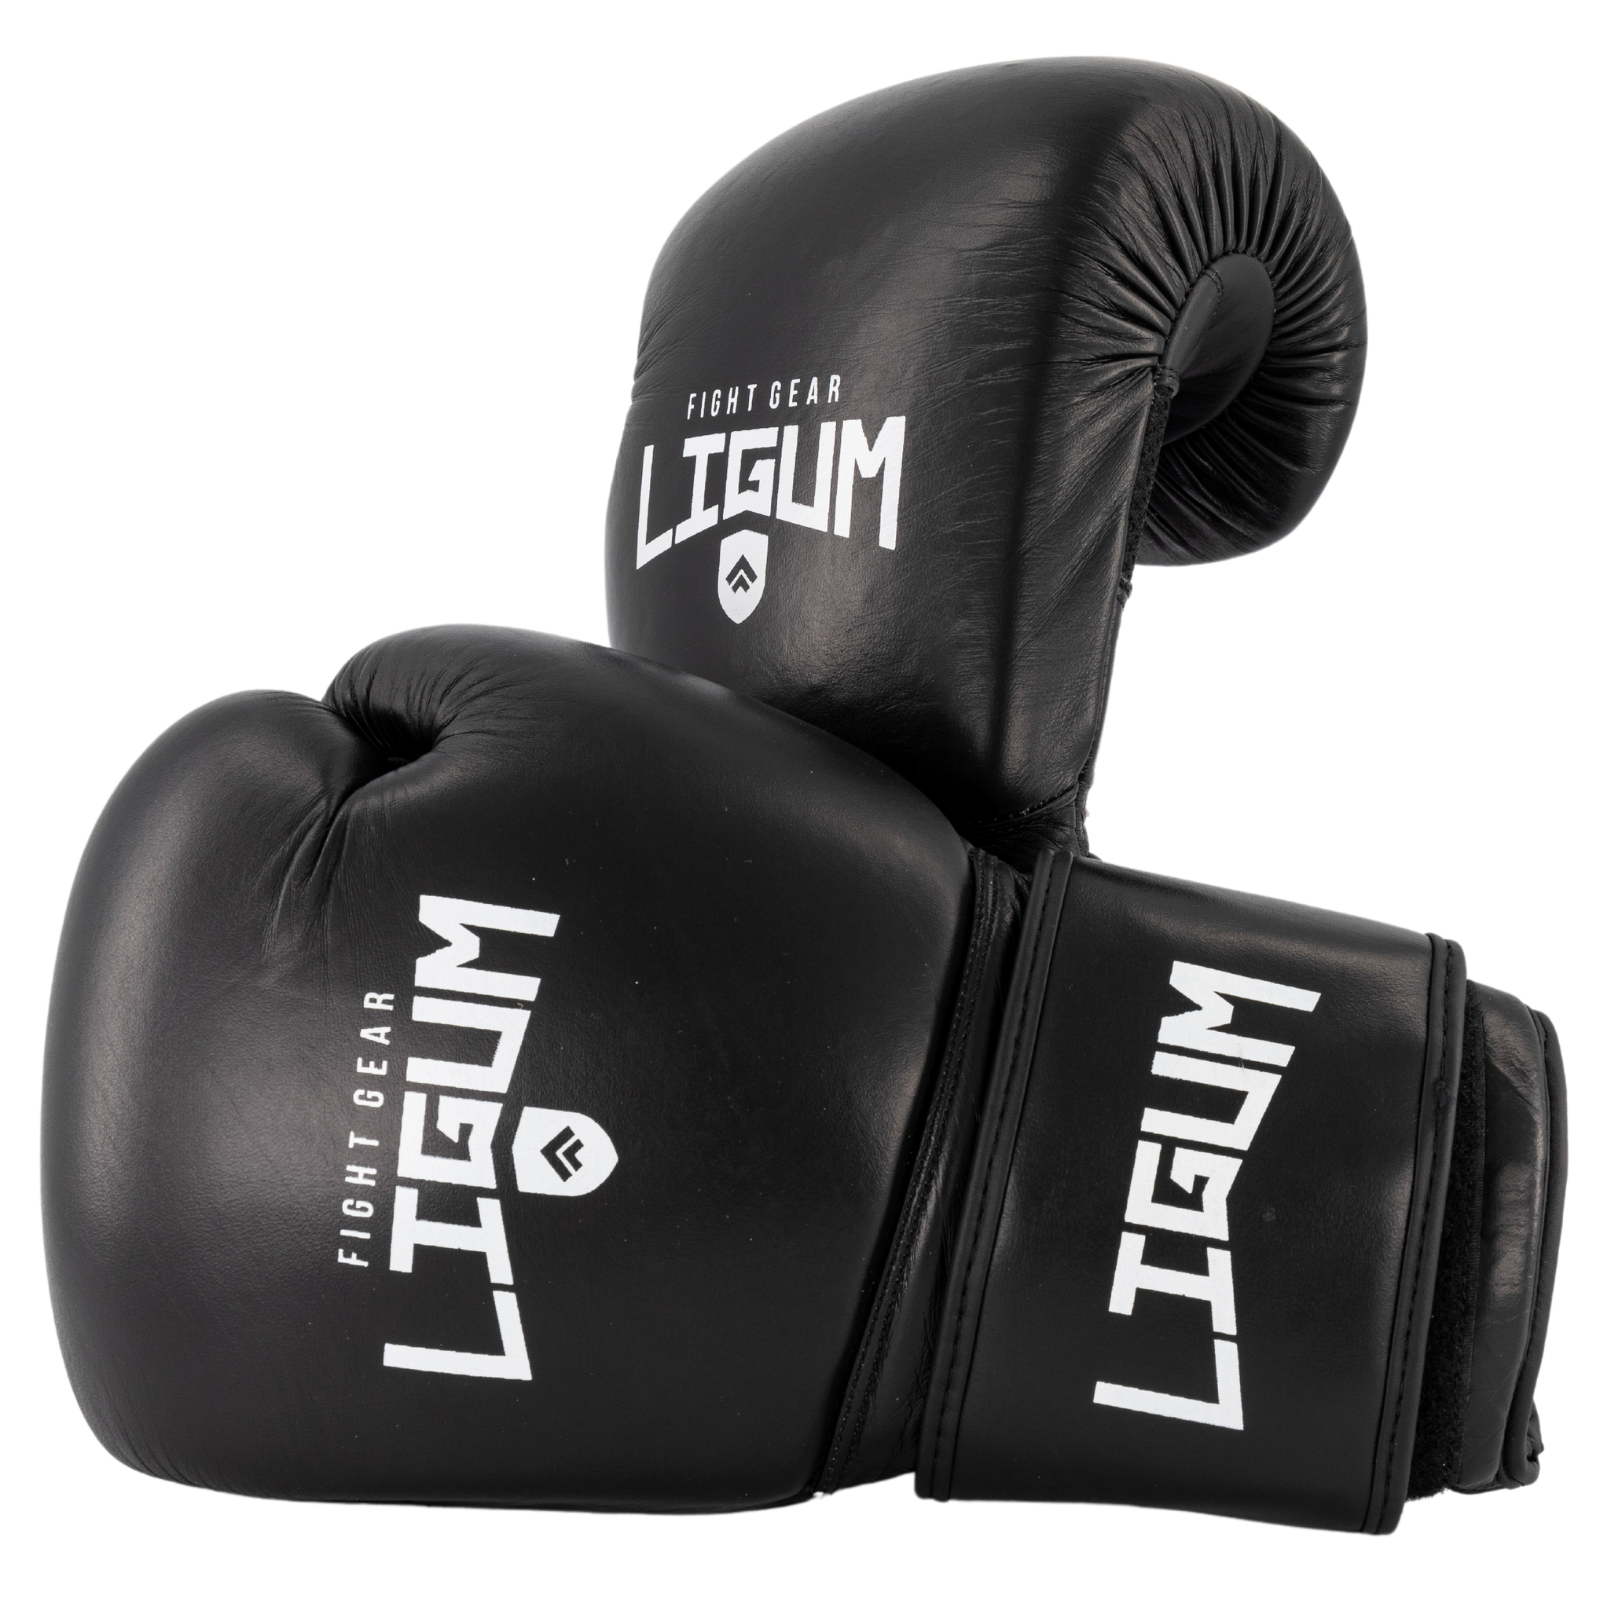 FITSO® Professional Boxing Gloves Sparring Mitts Bag Work Head Guard Head Gear 